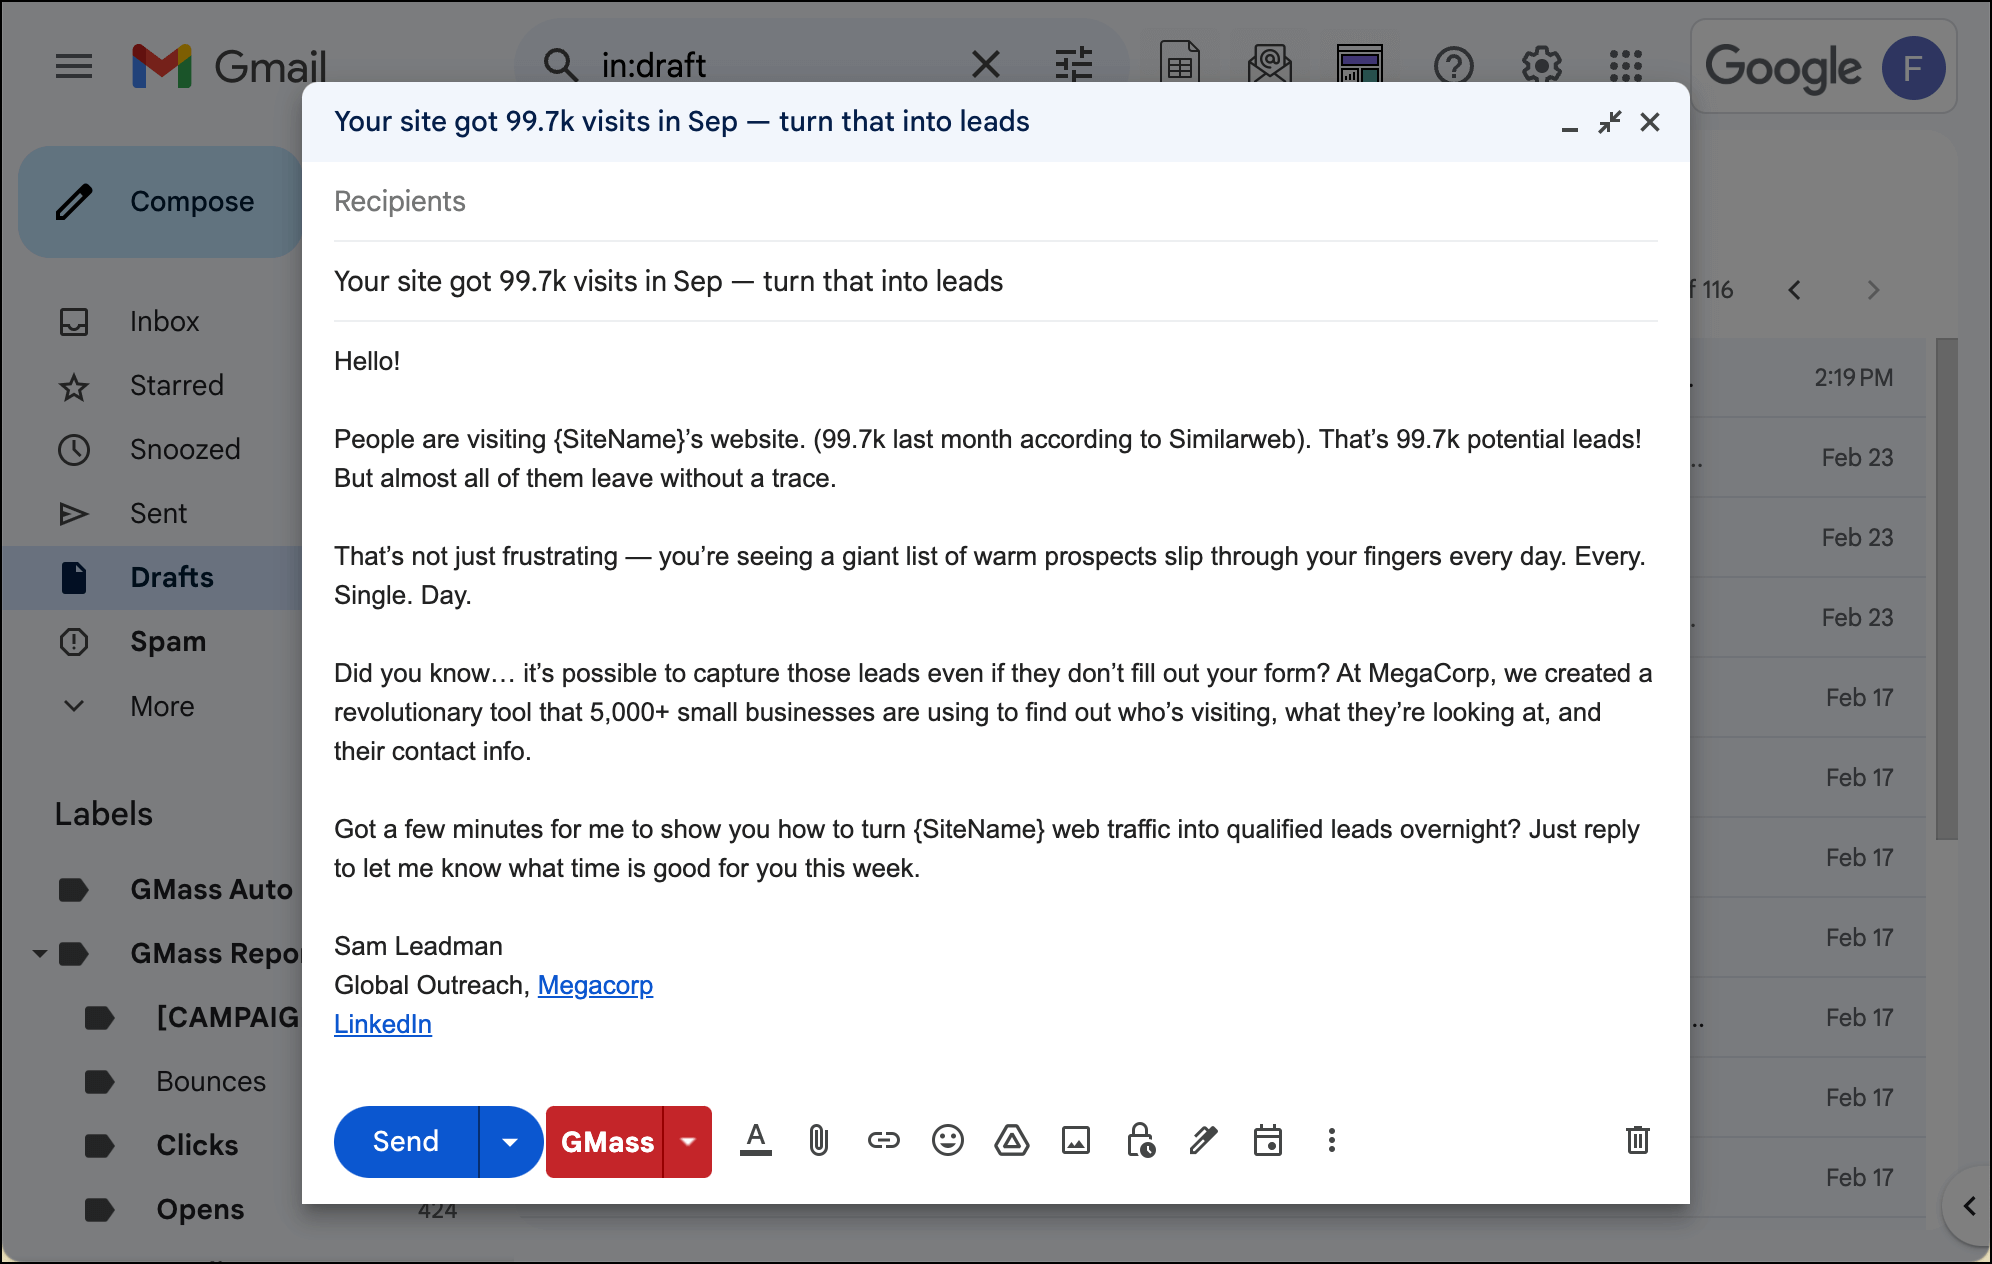 A sample email with some links in the signature